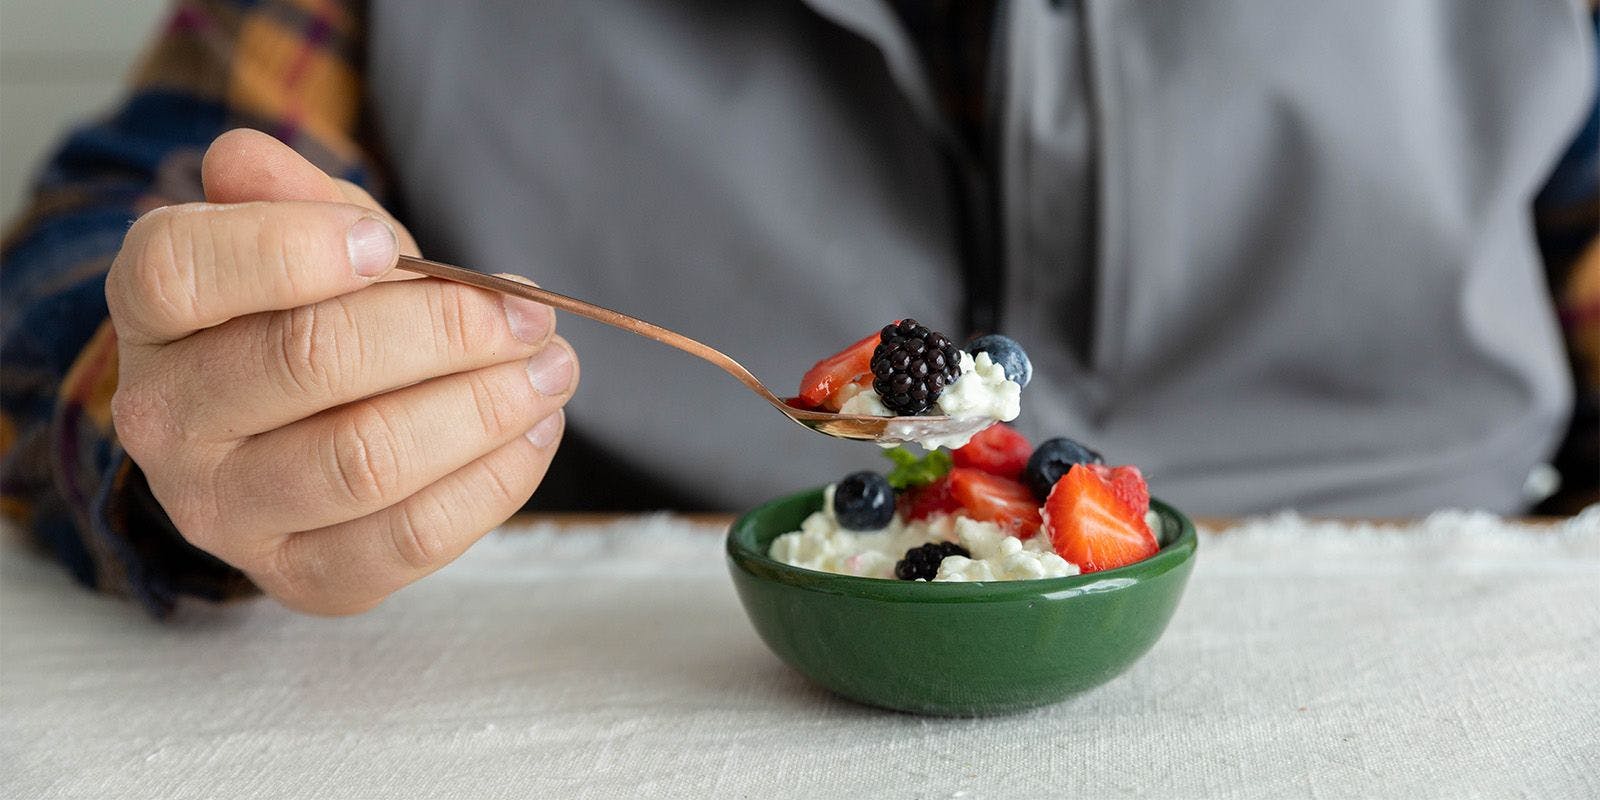 A man eats a bowl of organic cottage cheese with strawberries, blackberries and blueberries.